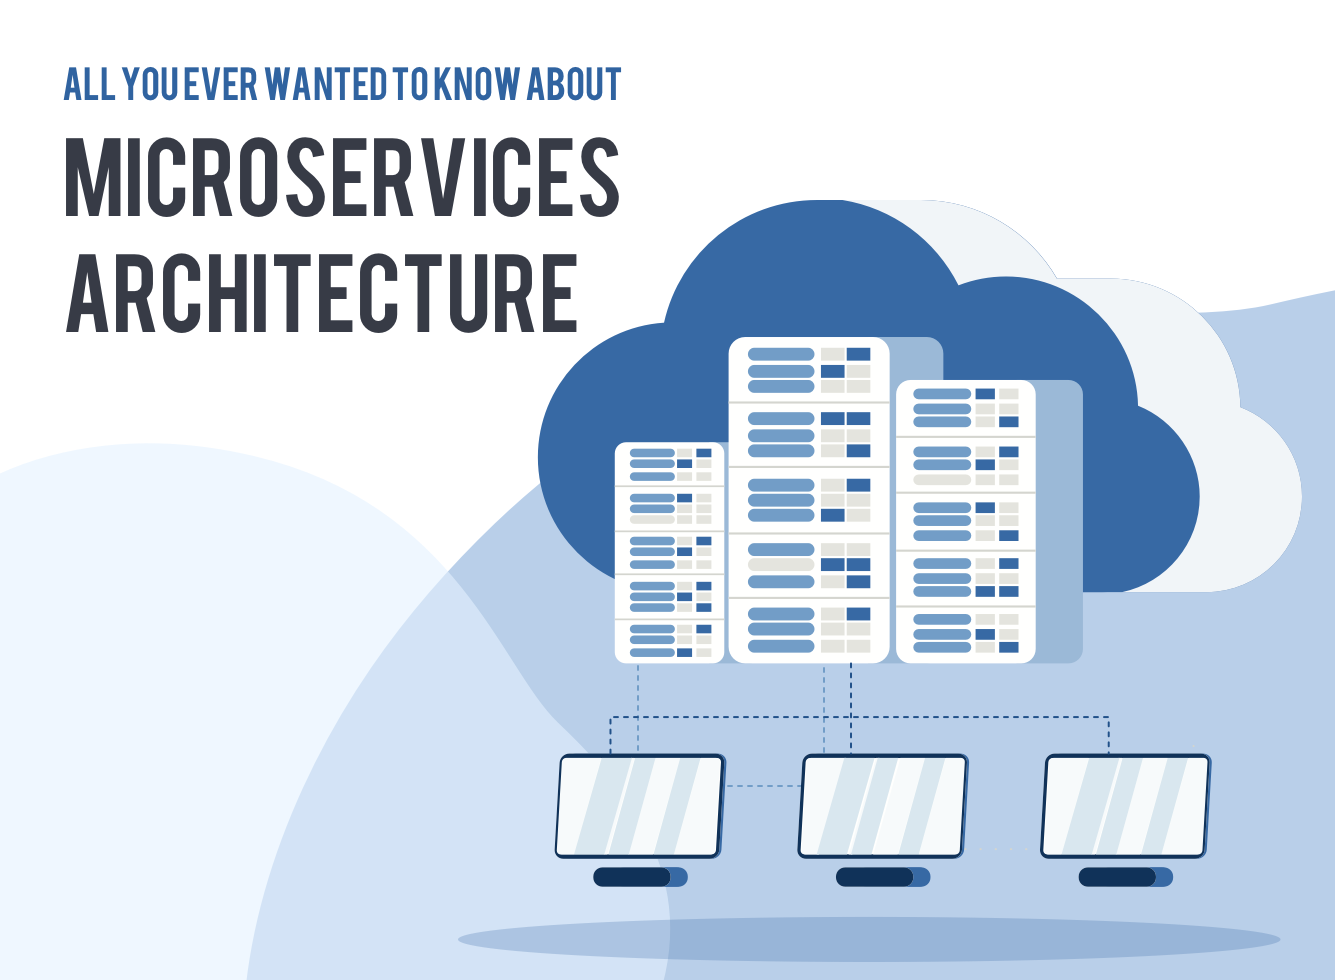 Microservices Explained – All You Ever Wanted to Know About Microservices Architecture